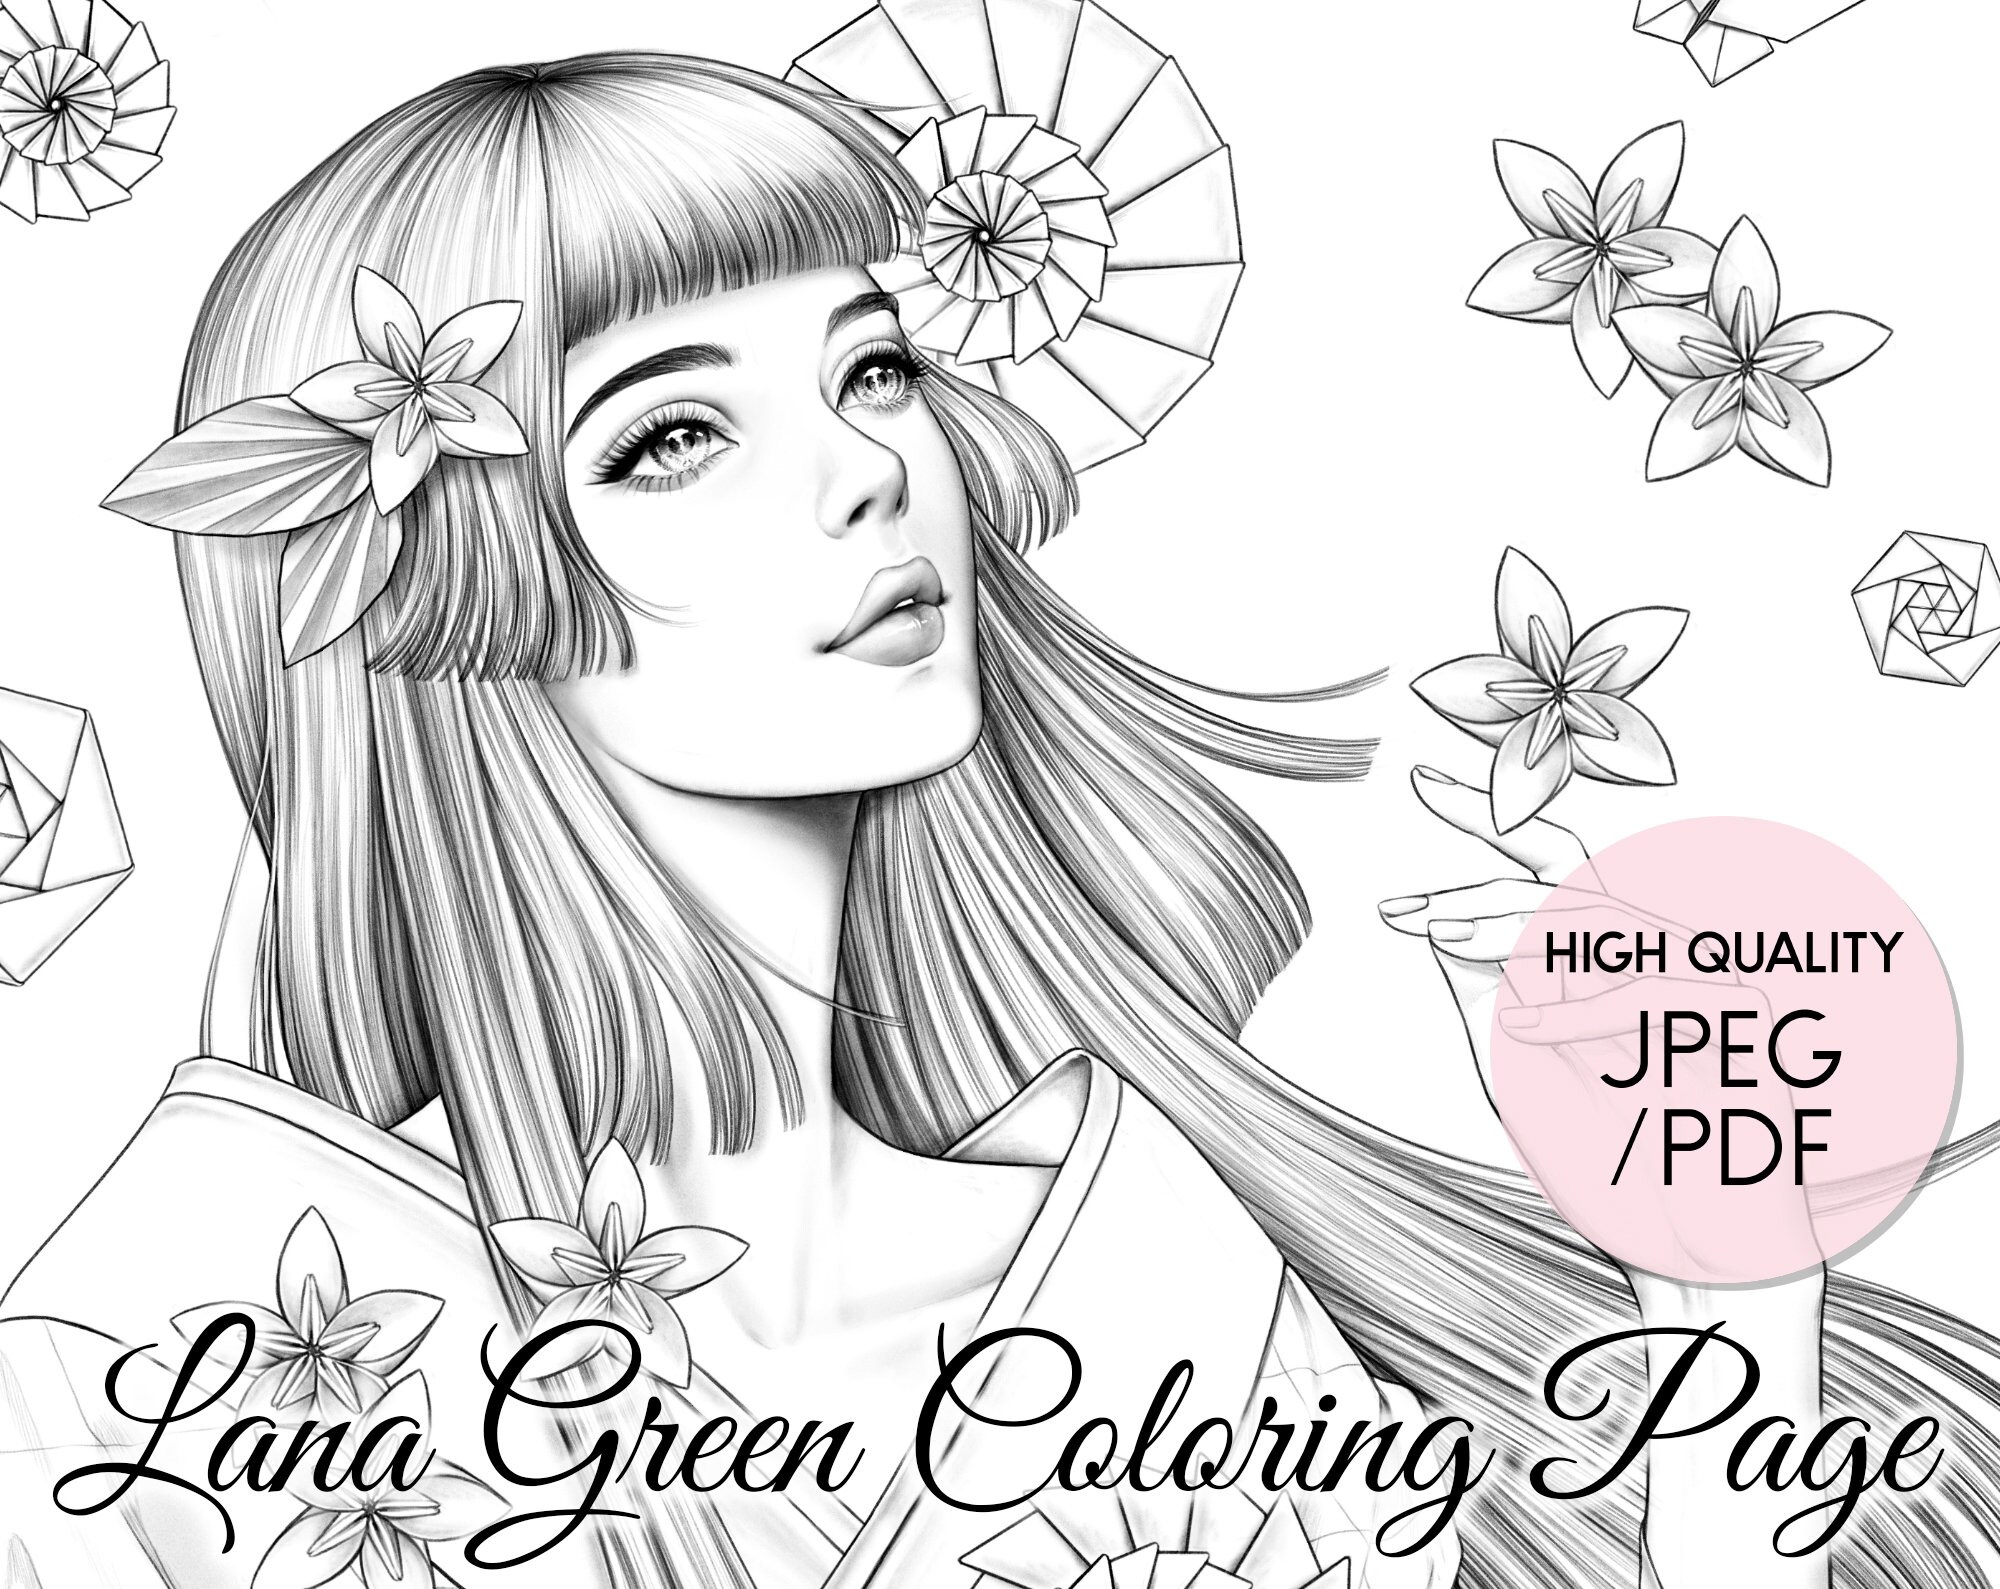 Origami coloring page for adults grayscale coloring page instant download lana green art jpeg pdf